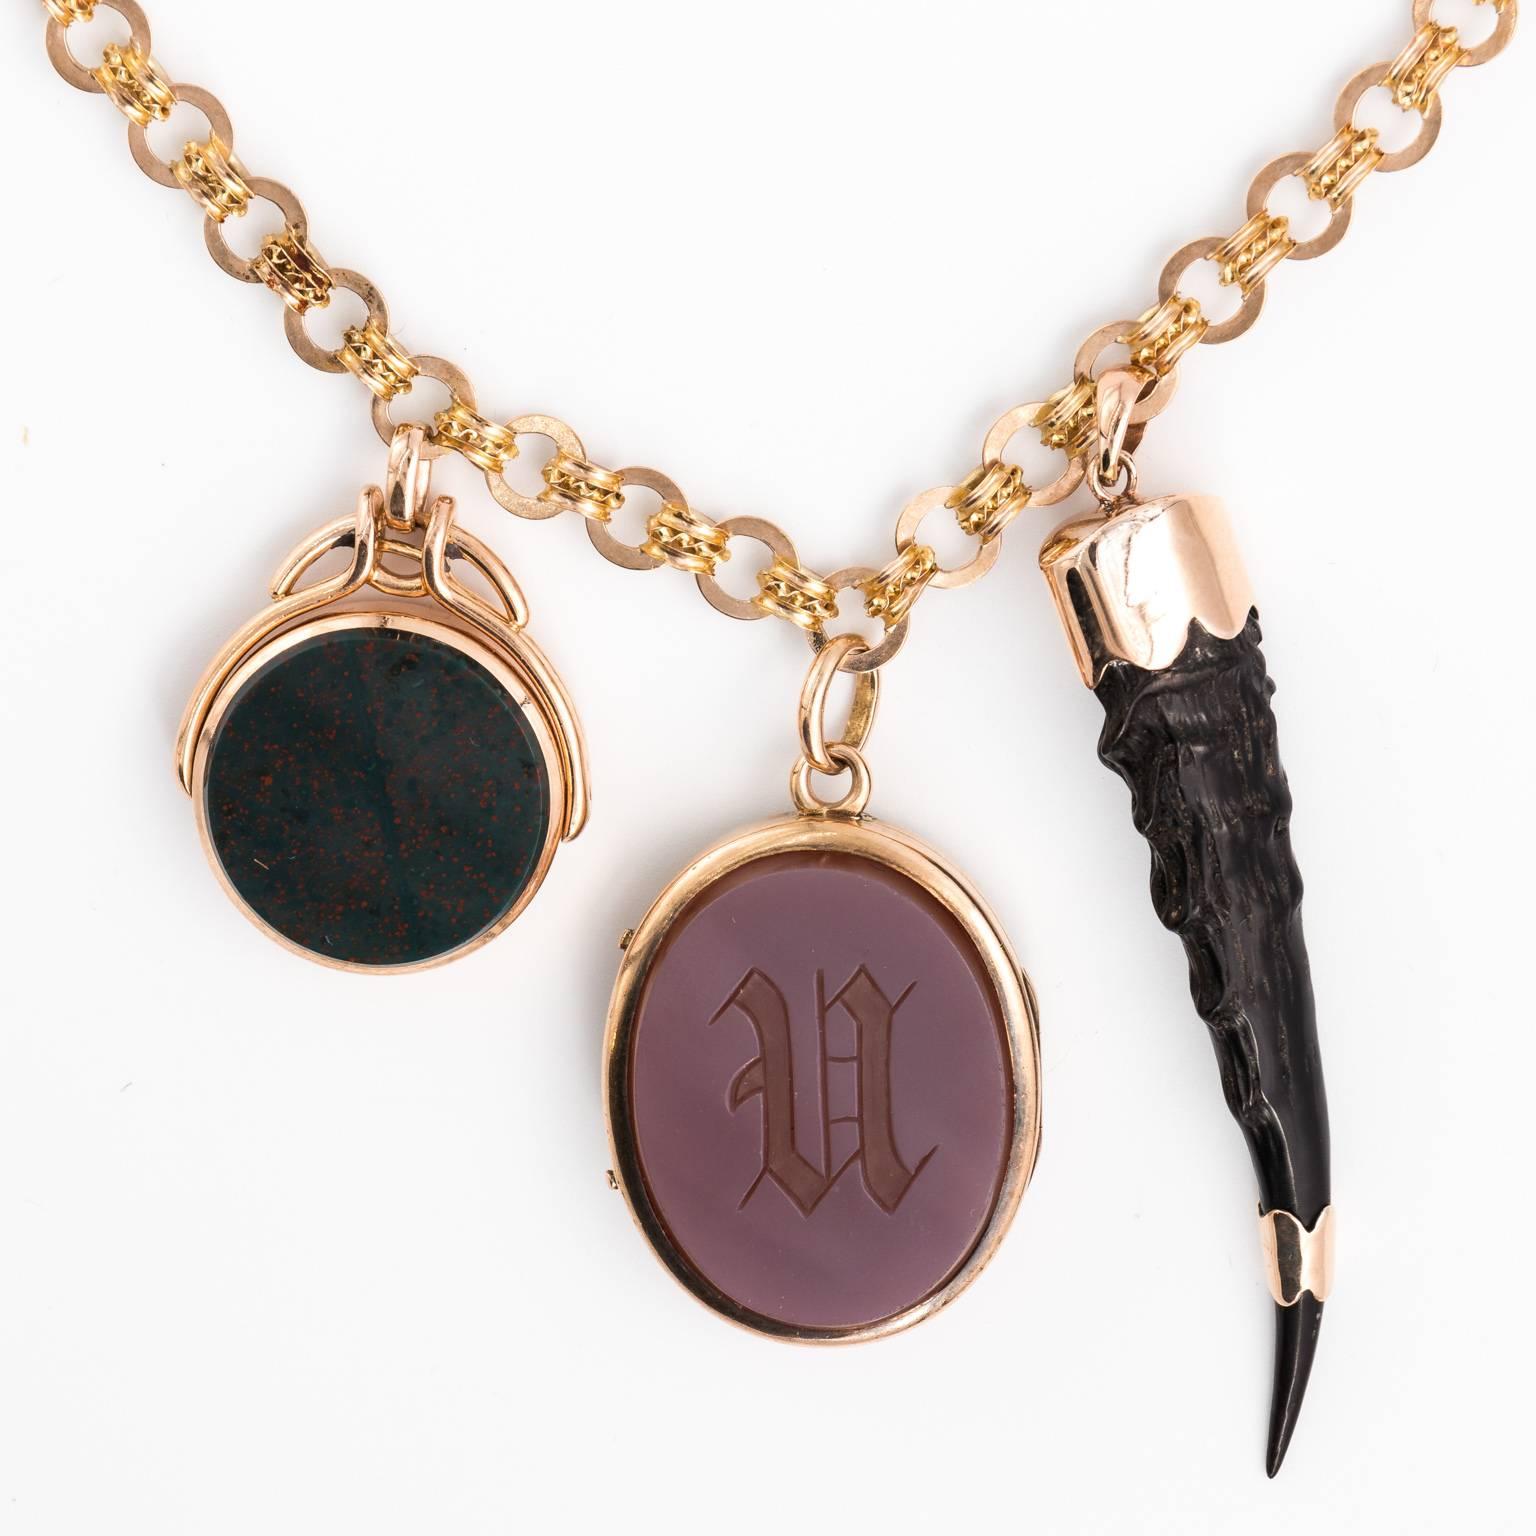 Circa late Victorian collage watch chain necklace that features bloodstone and carnelian fobs. a carnelian and bloodstone locket, and a horn in 14 karat gold. This piece is reversible and can be worn on either side.